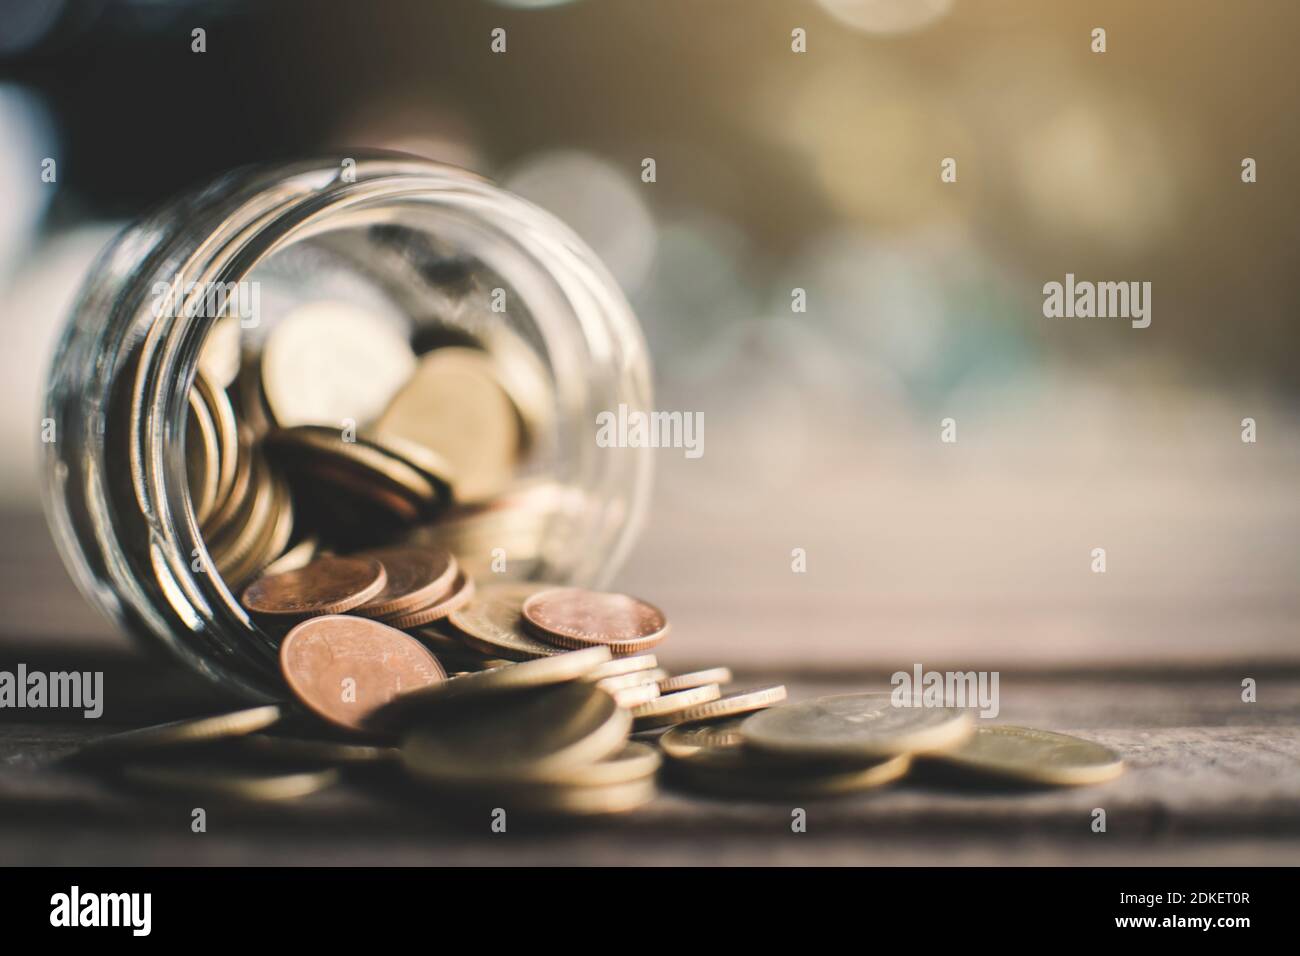 Close-up Of Coins Falling From Glass Jar On Table Stock Photo